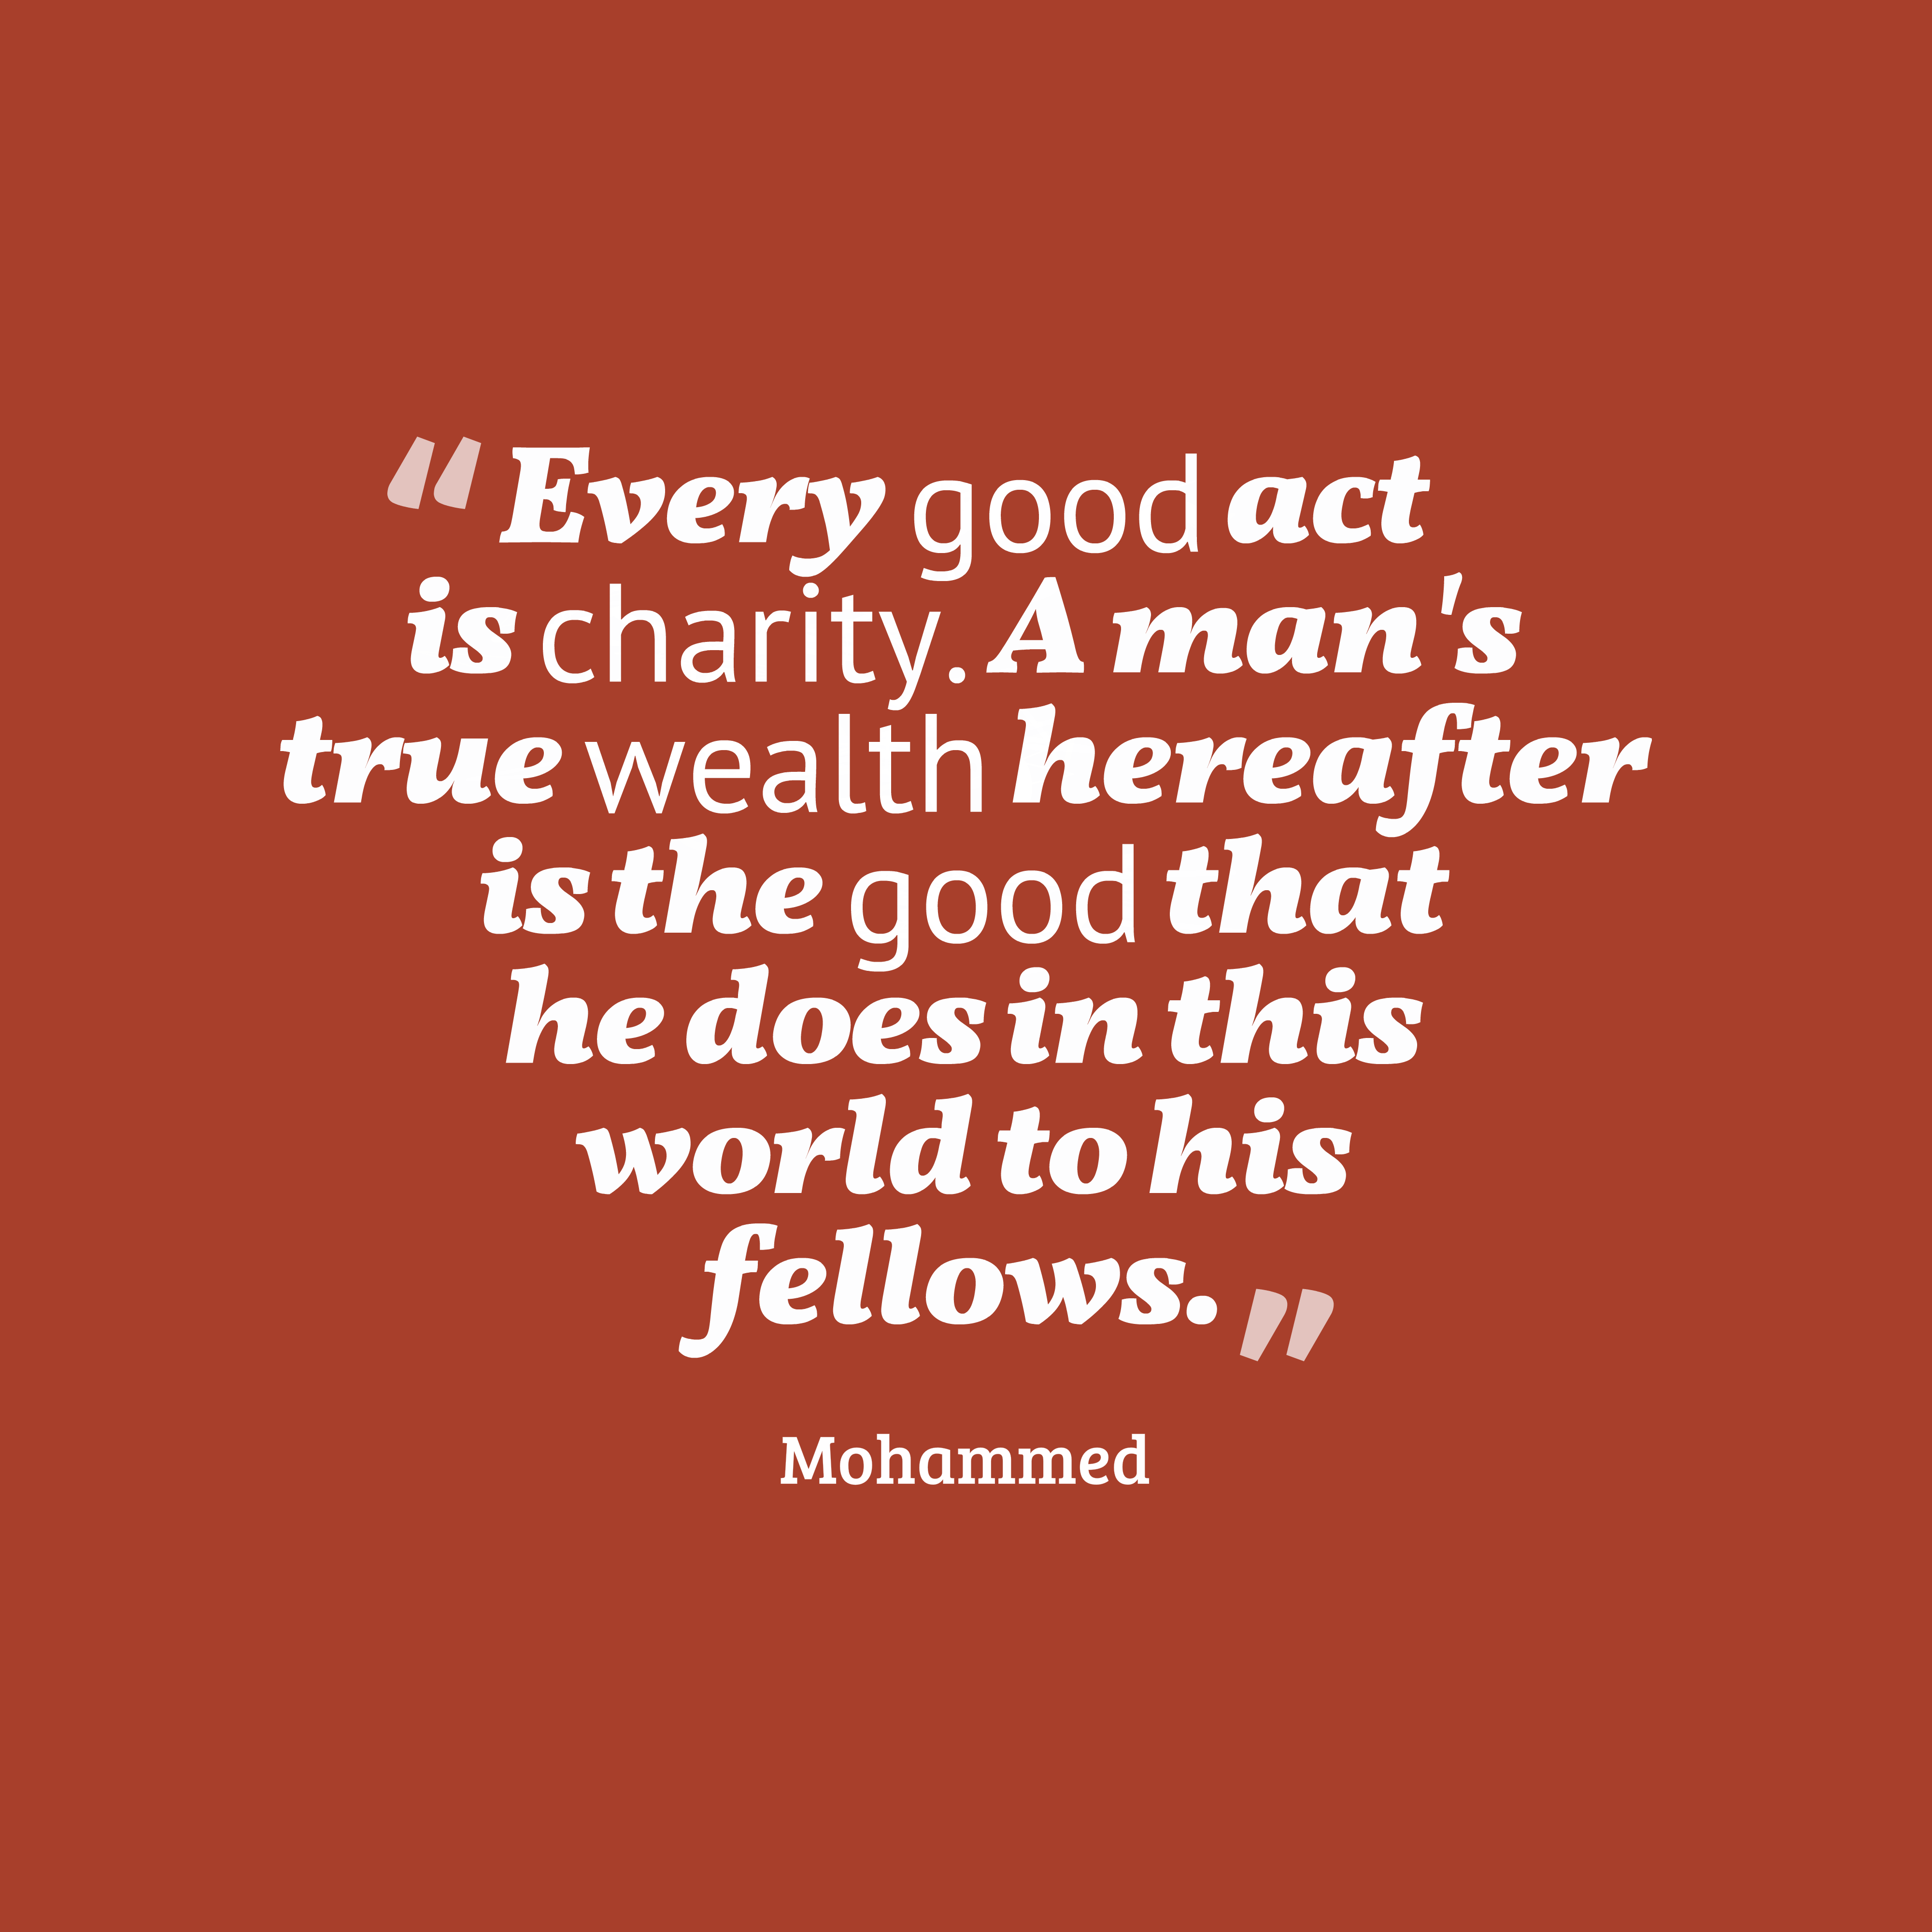 Every good act is charity. A man’s true wealth hereafter is the good that he does in this world to his fellows. mohammed